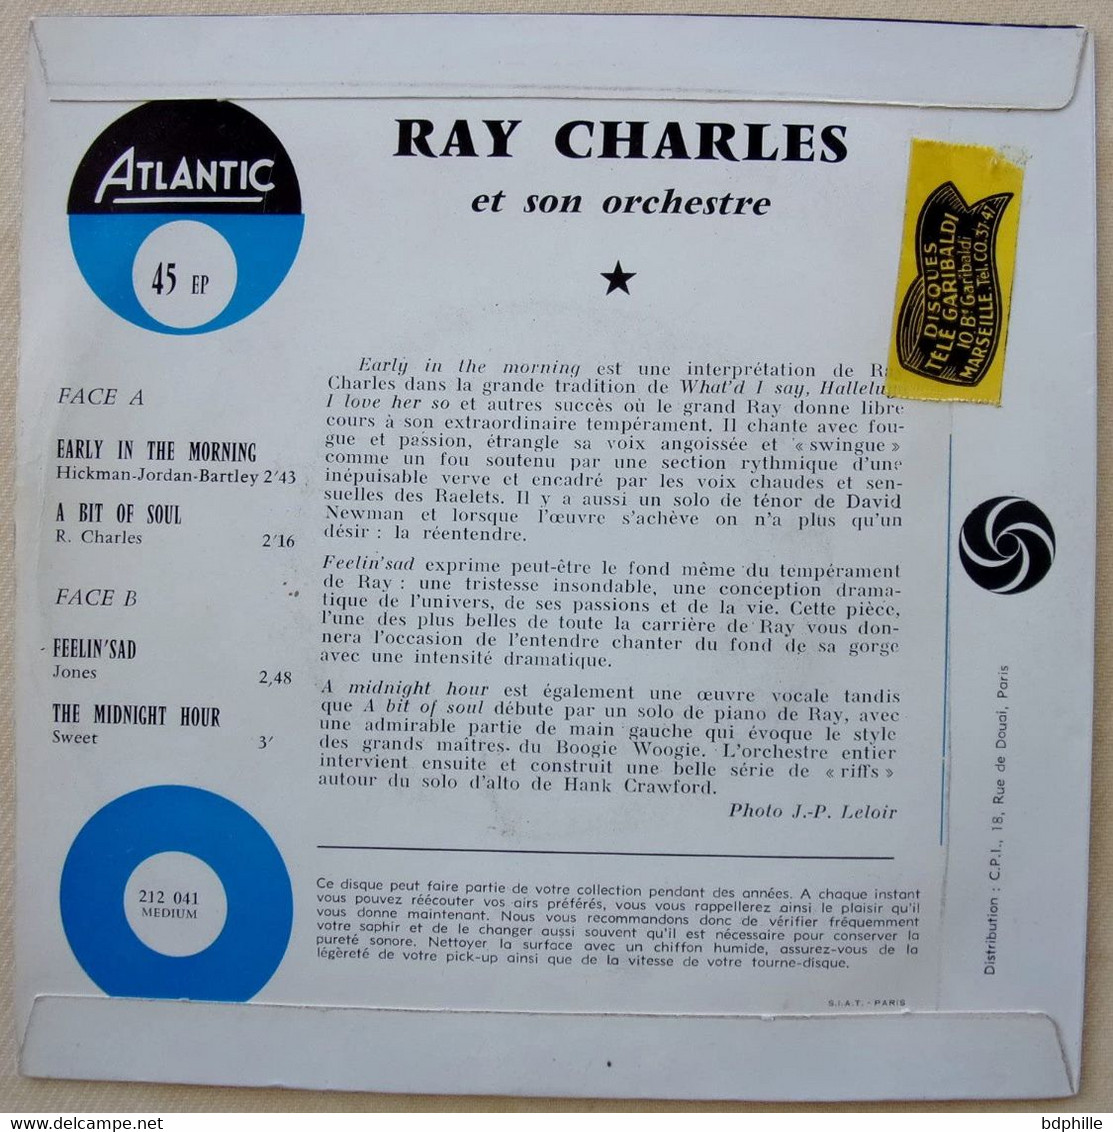 Ray Charles Early In The Morning EP 45 TBE - Soul - R&B